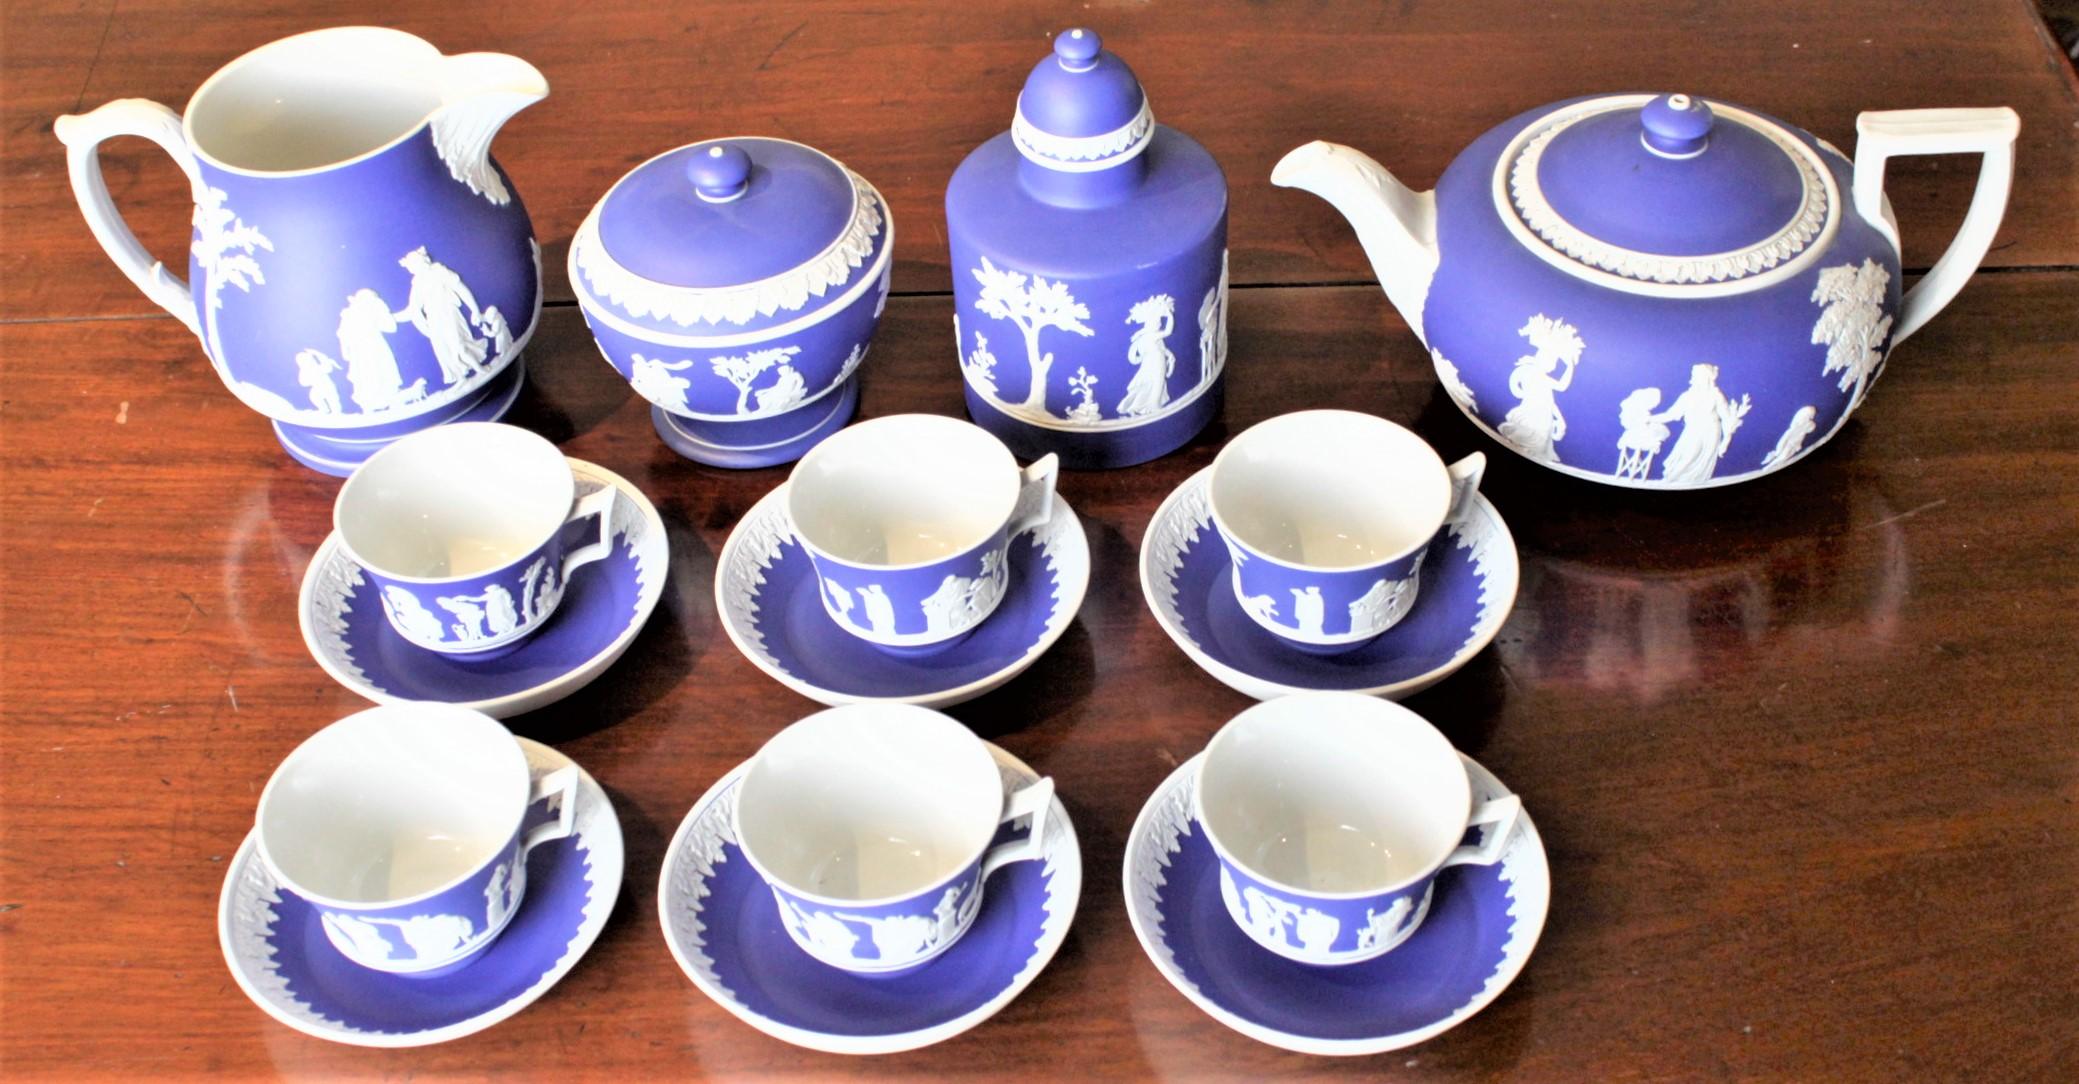 This antique ten piece tea set was made by the renowned Wedgwood Company of England in approximately 1830 in a Neoclassical Revival style. The set is done in an unglazed stoneware 'Jasperware' with white over a deep blue ground. The set is composed